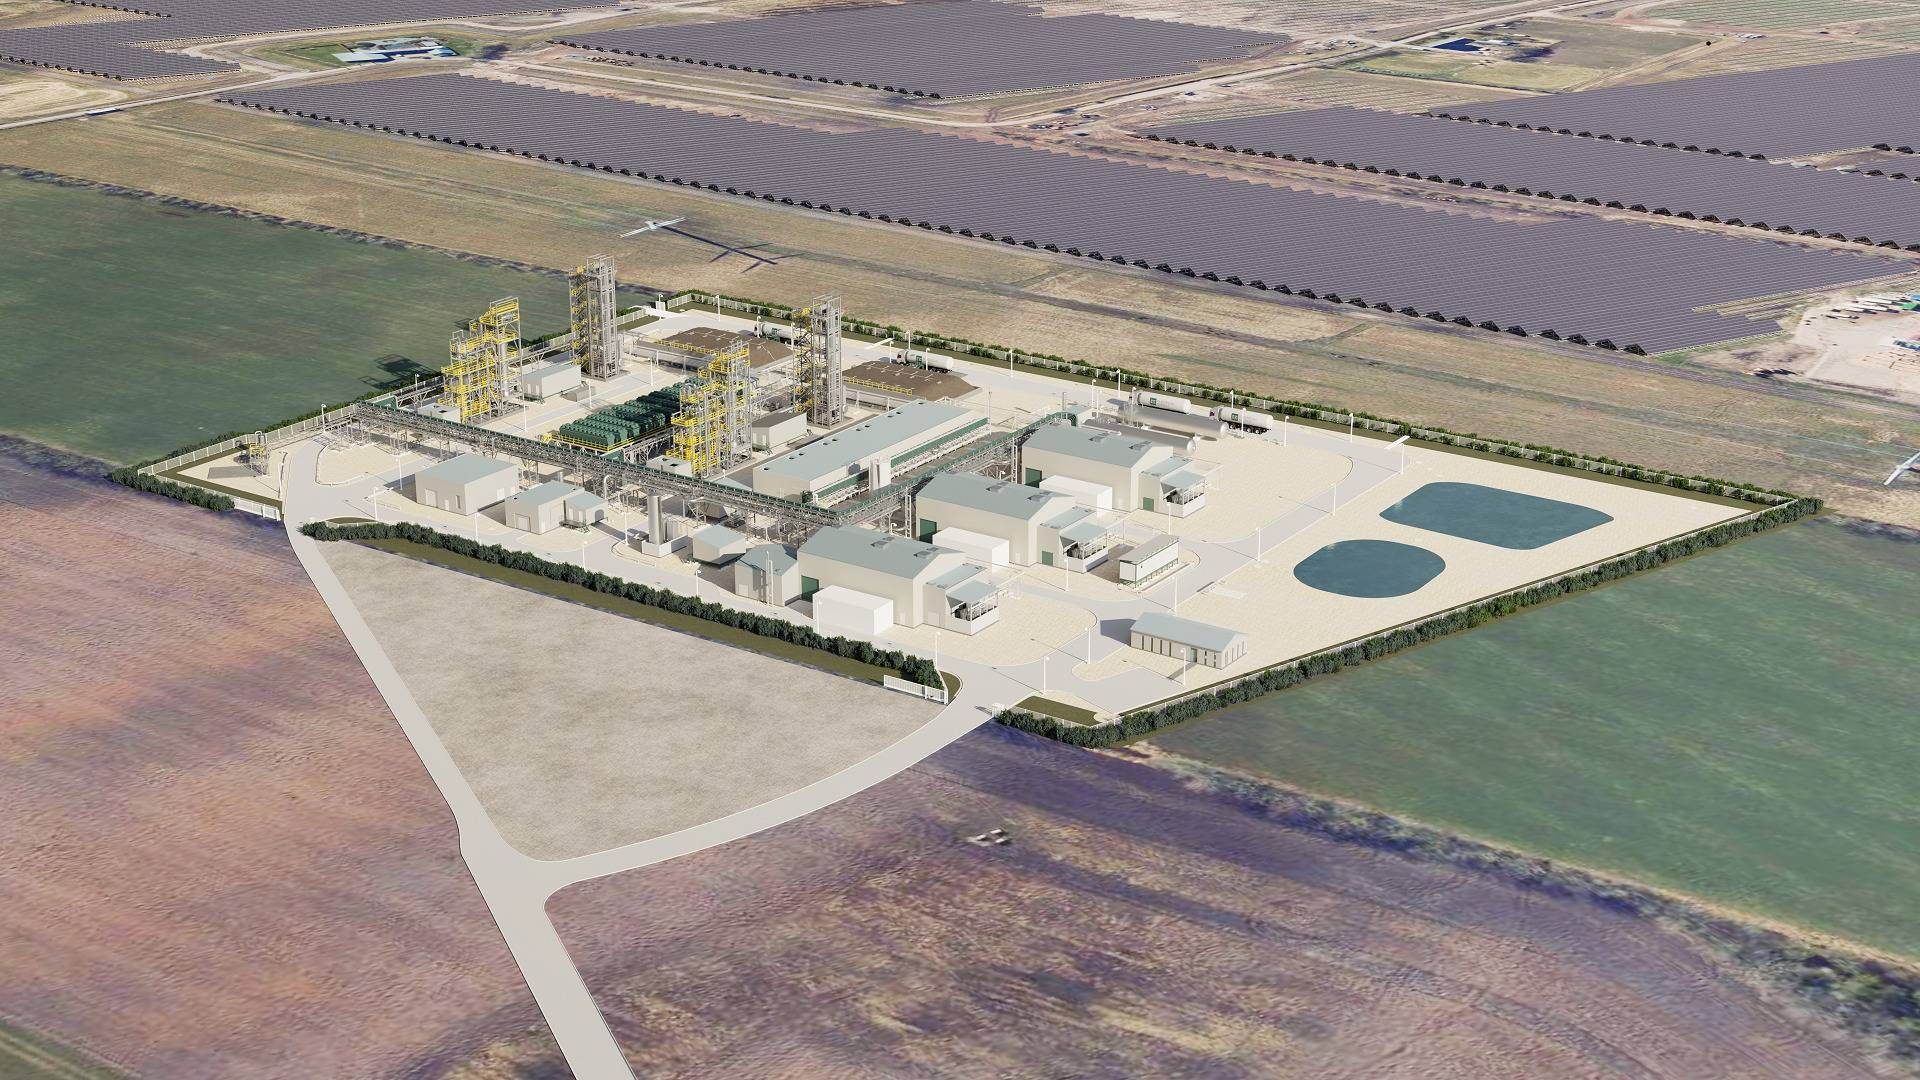 Pictured is a visualization of European Energy's Danish e-methanol project at Kassø, which the developer is currently completing. The plant is set to be the world's largest e-methanol plant with a production of 32,000 tons of e-methanol per year. | Photo: European Energy/pr.